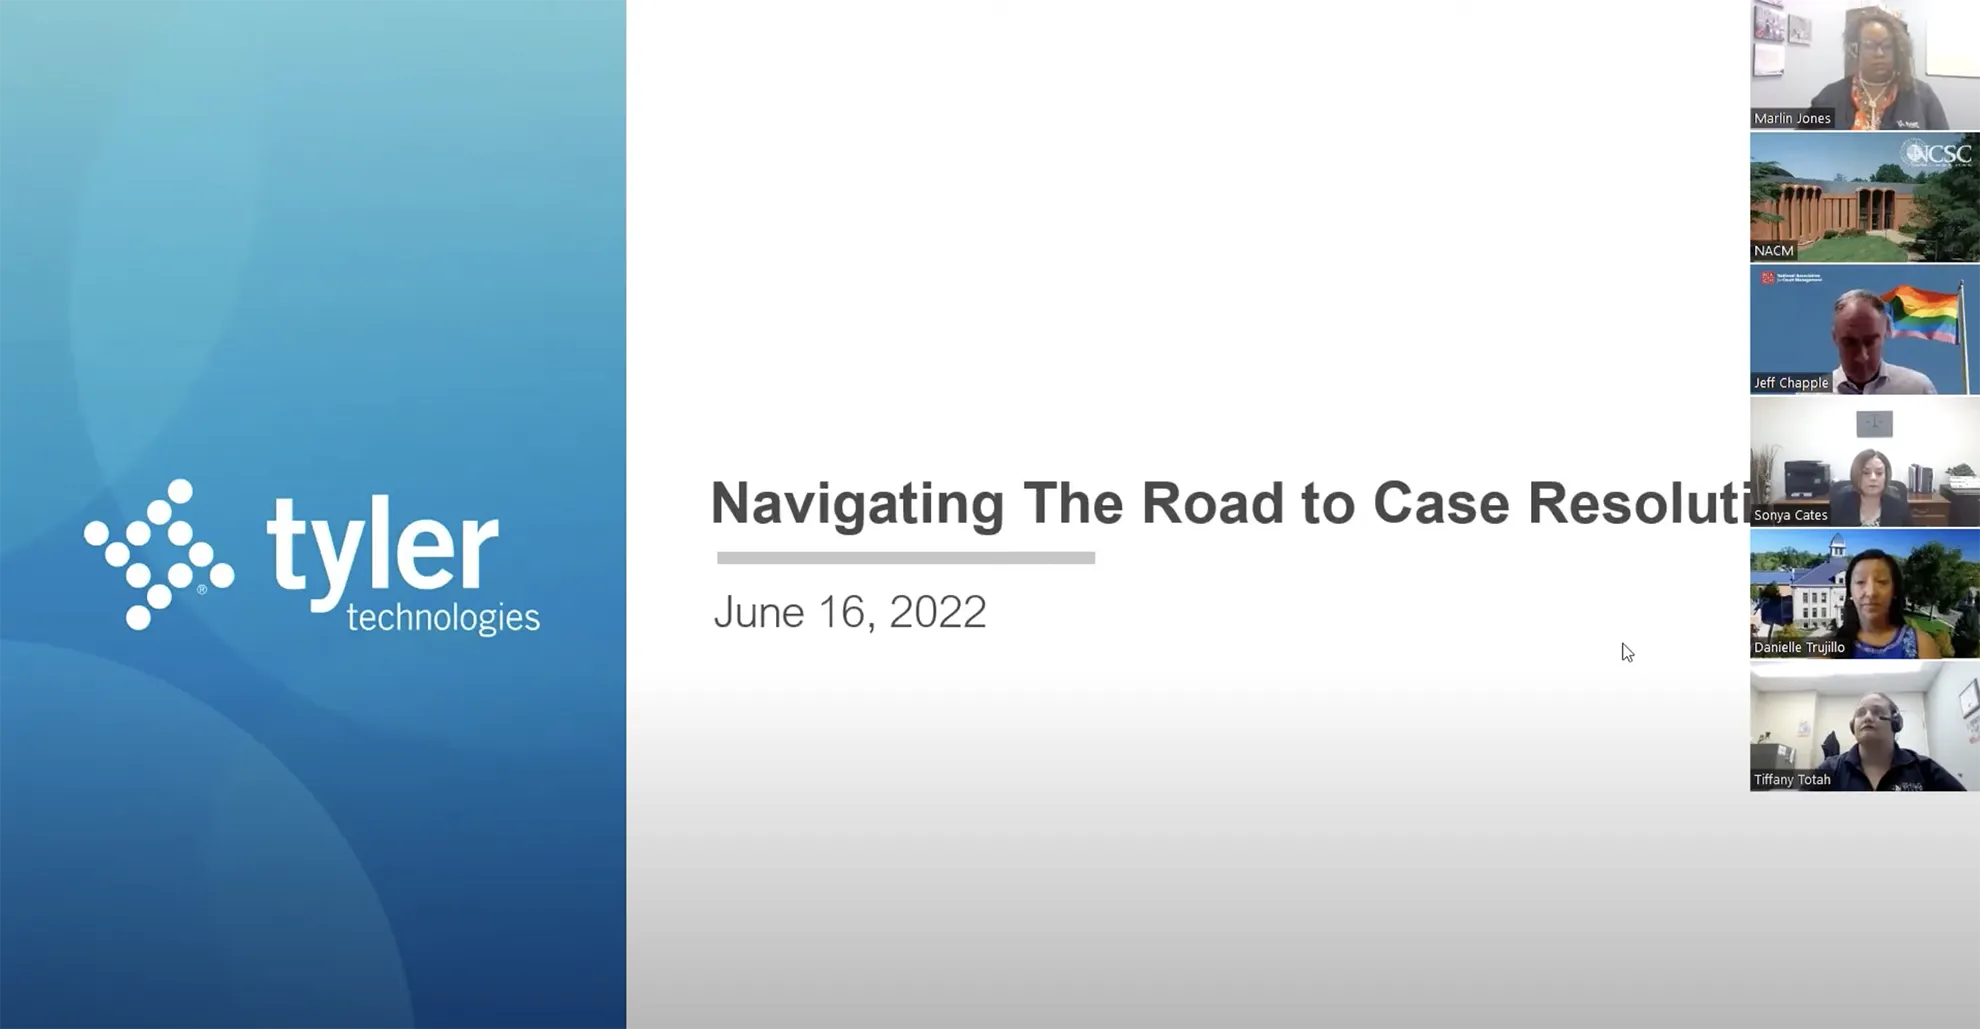 Navigating the Road to Case Resolution